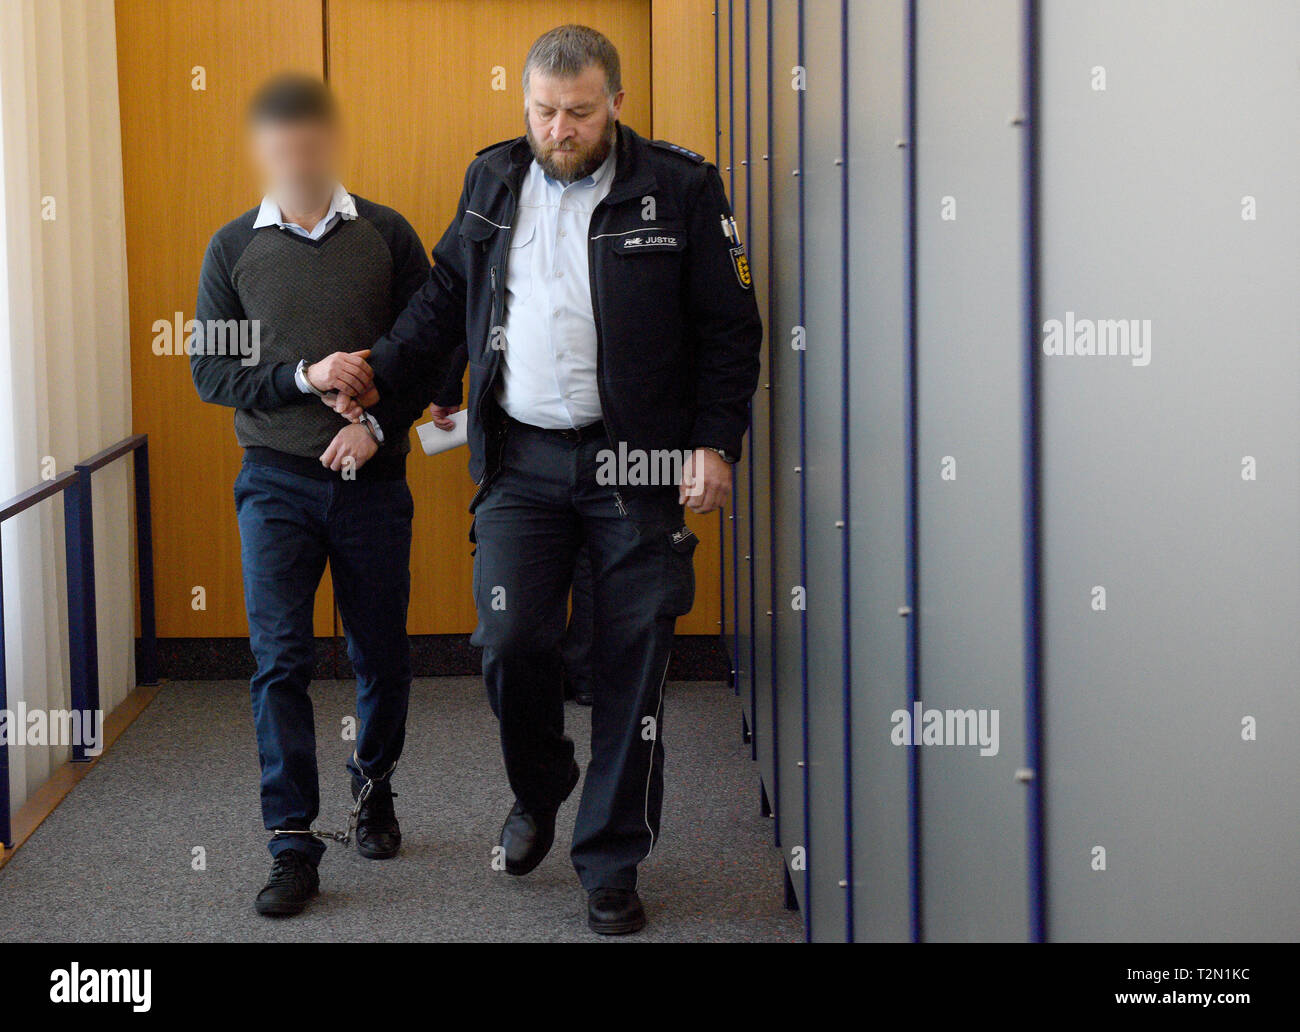 02 April 2019, Baden-Wuerttemberg, Ulm: In the district court, a judicial watchman (r) presents the accused, who is tied to his hands and feet. About two years after the murder of a young Albanian in Germany, the Ulm Regional Court announced the verdict. The accused, who is also of Albanian origin, is said to have played a central role in the murder of the victim, according to the public prosecutor's office. The motive was an archaic "blood revenge" in the course of a feud between hostile families in Albania. The court sentenced the accused to life imprisonment for murder. Photo: Stefan Puchne Stock Photo